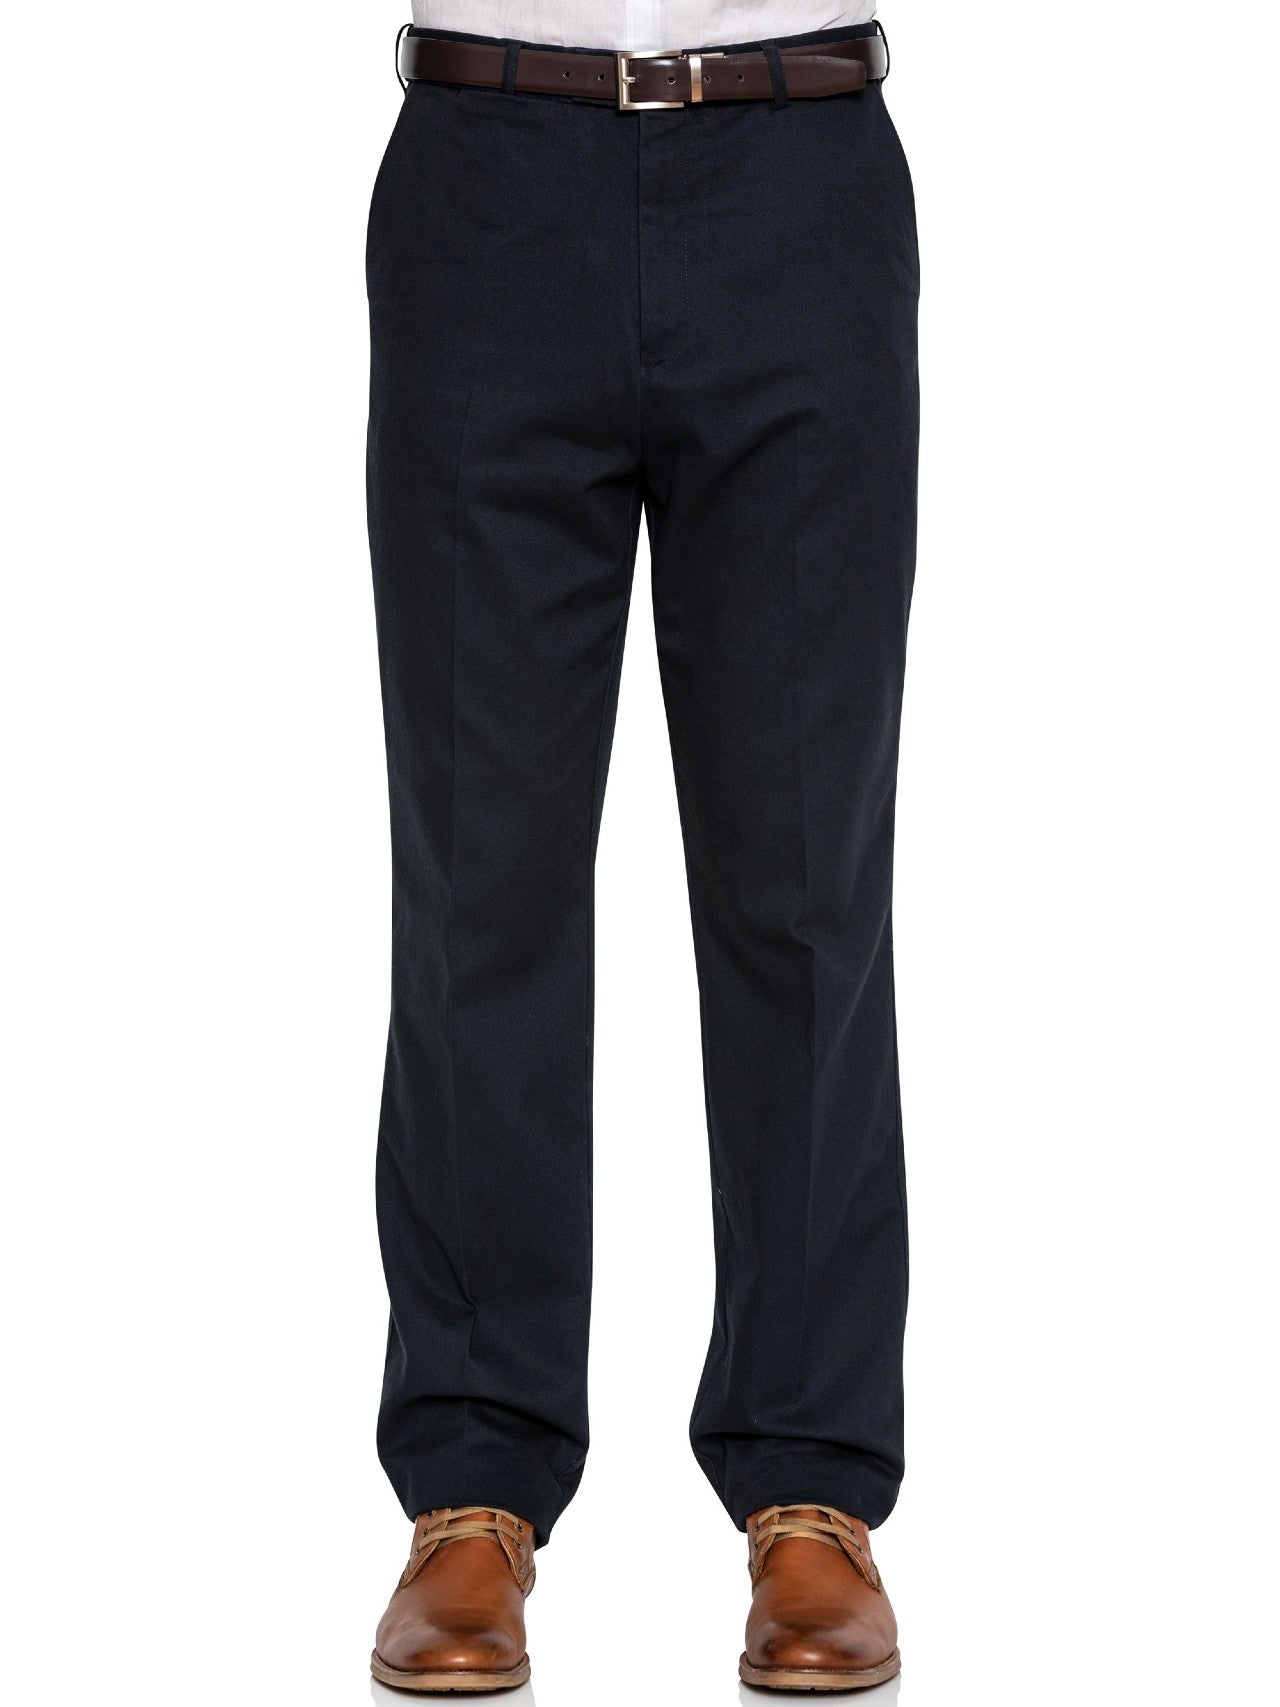 Country Look FYG302 Carnarvon Trousers - Thomson's Suits Ltd - Navy - 87 - 47546